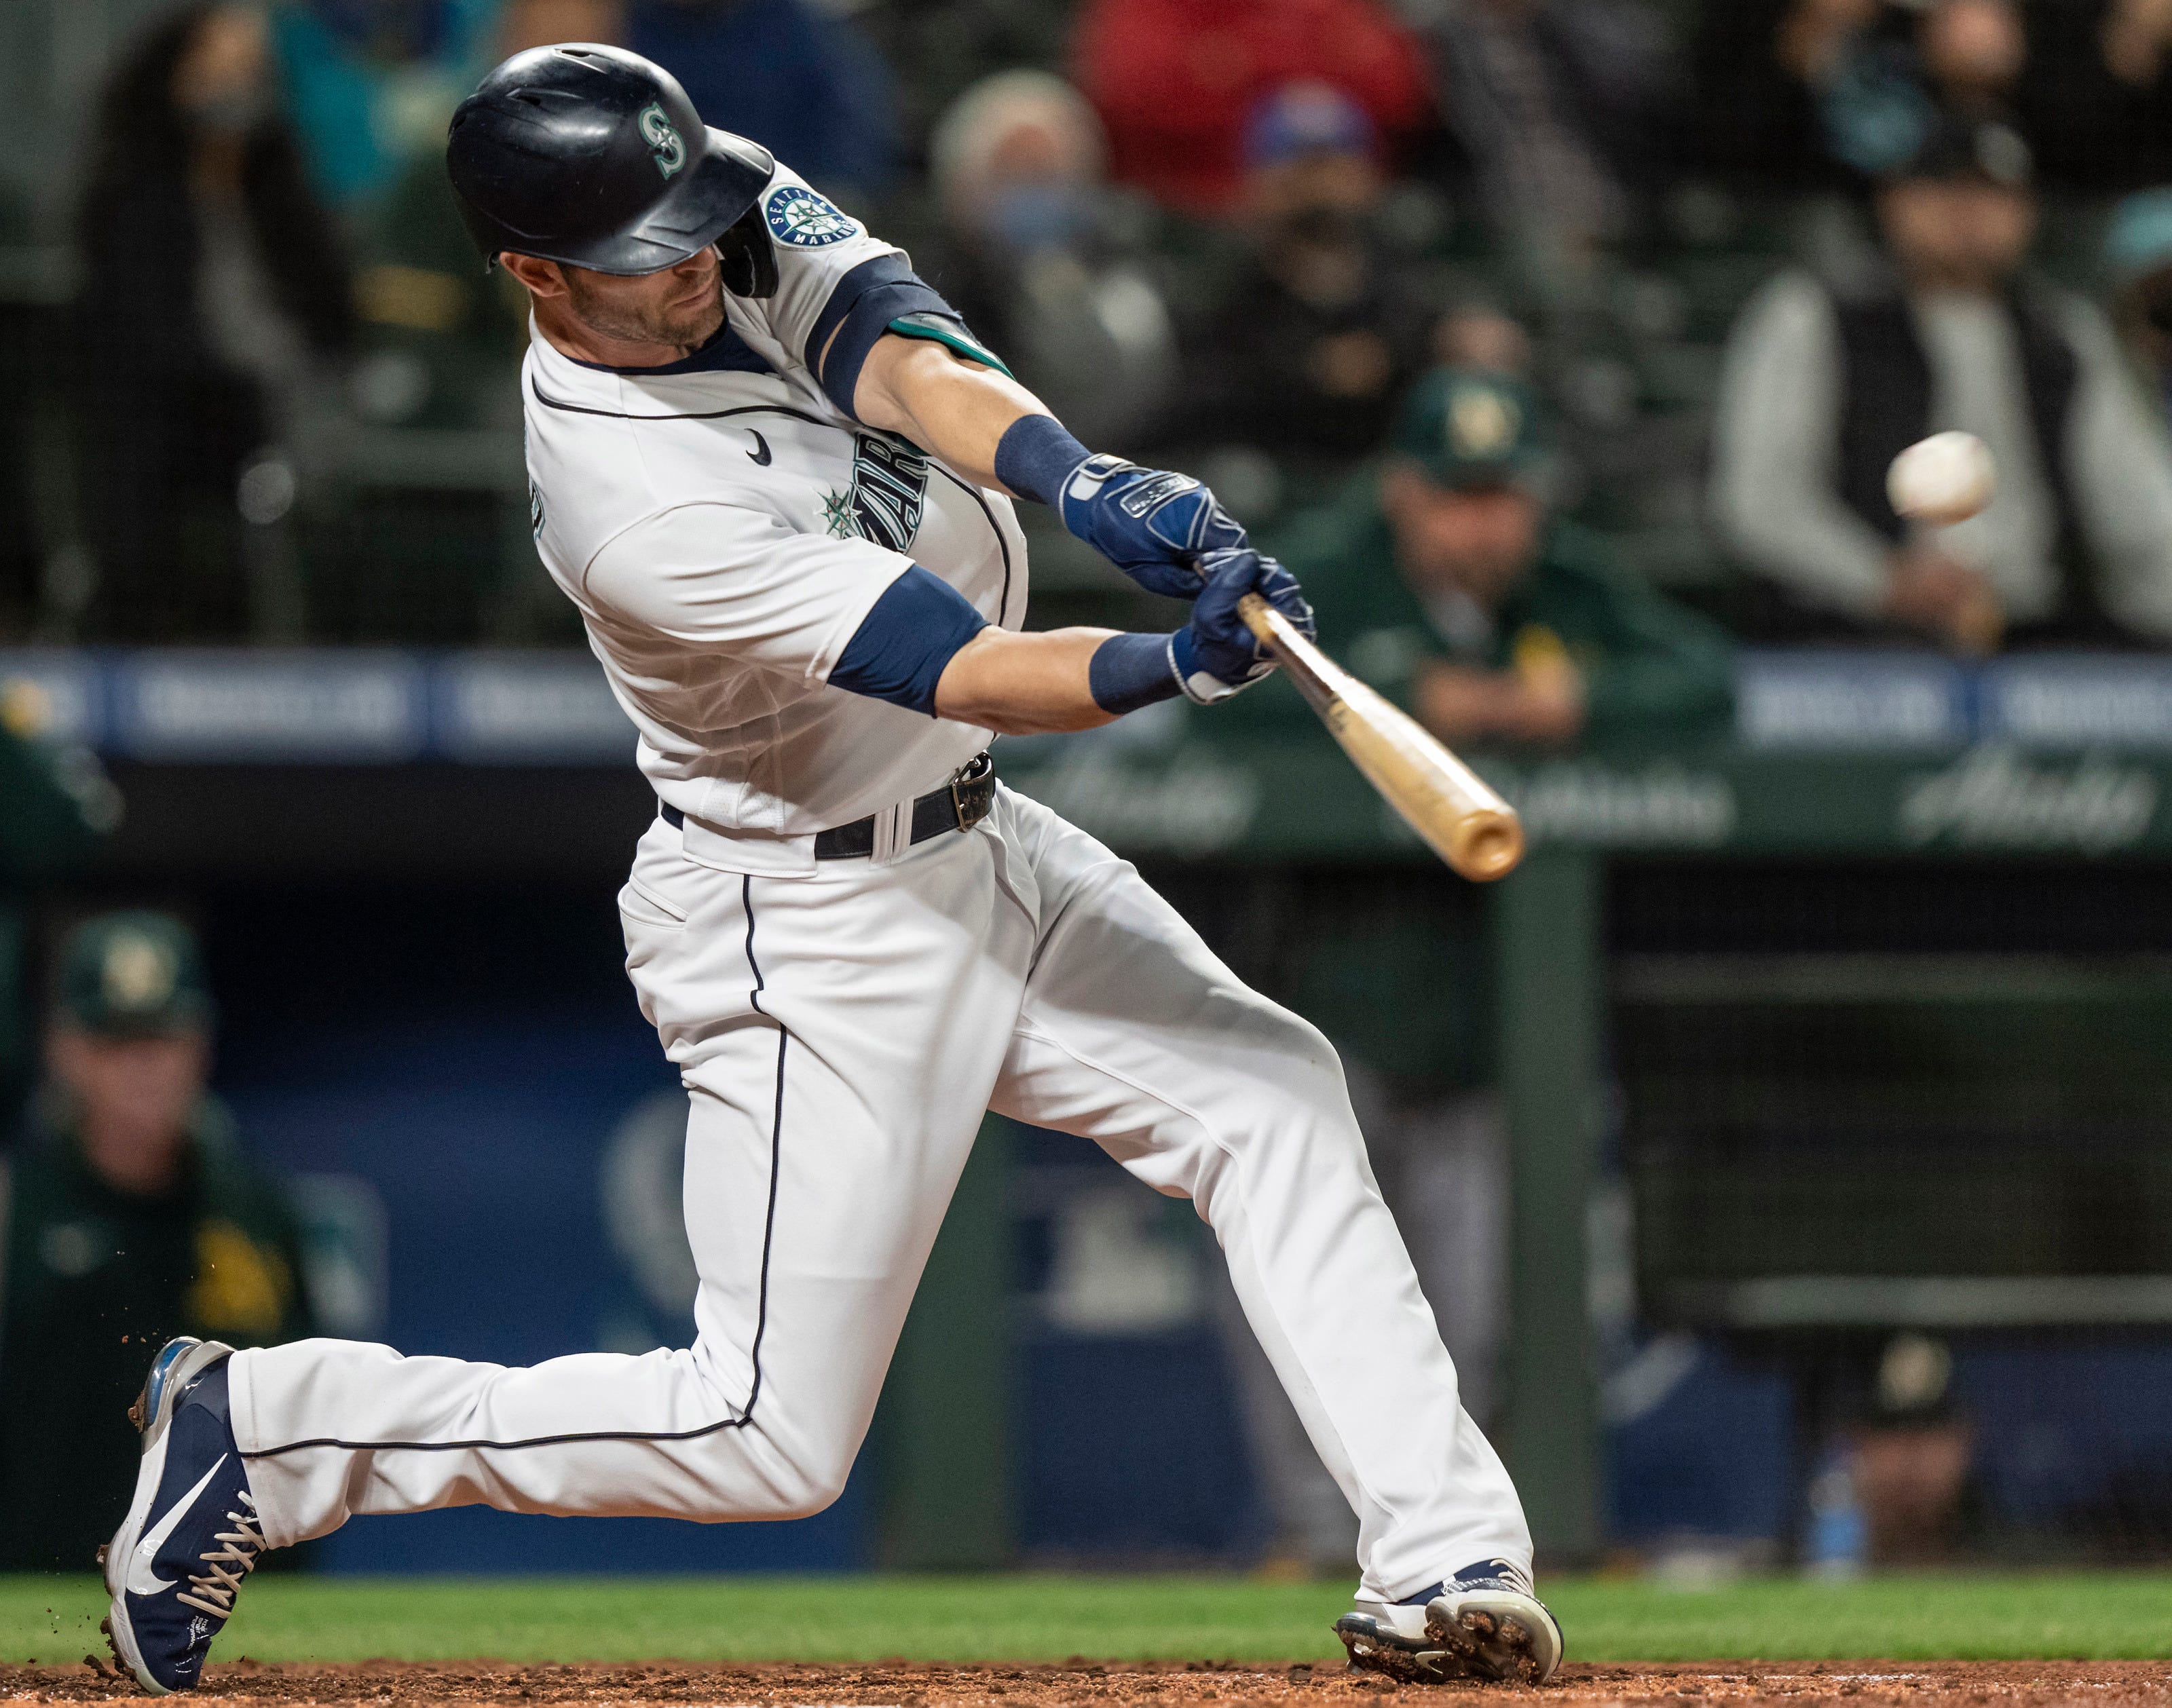 Toro HR hours after trading sides, but Astros beat Mariners